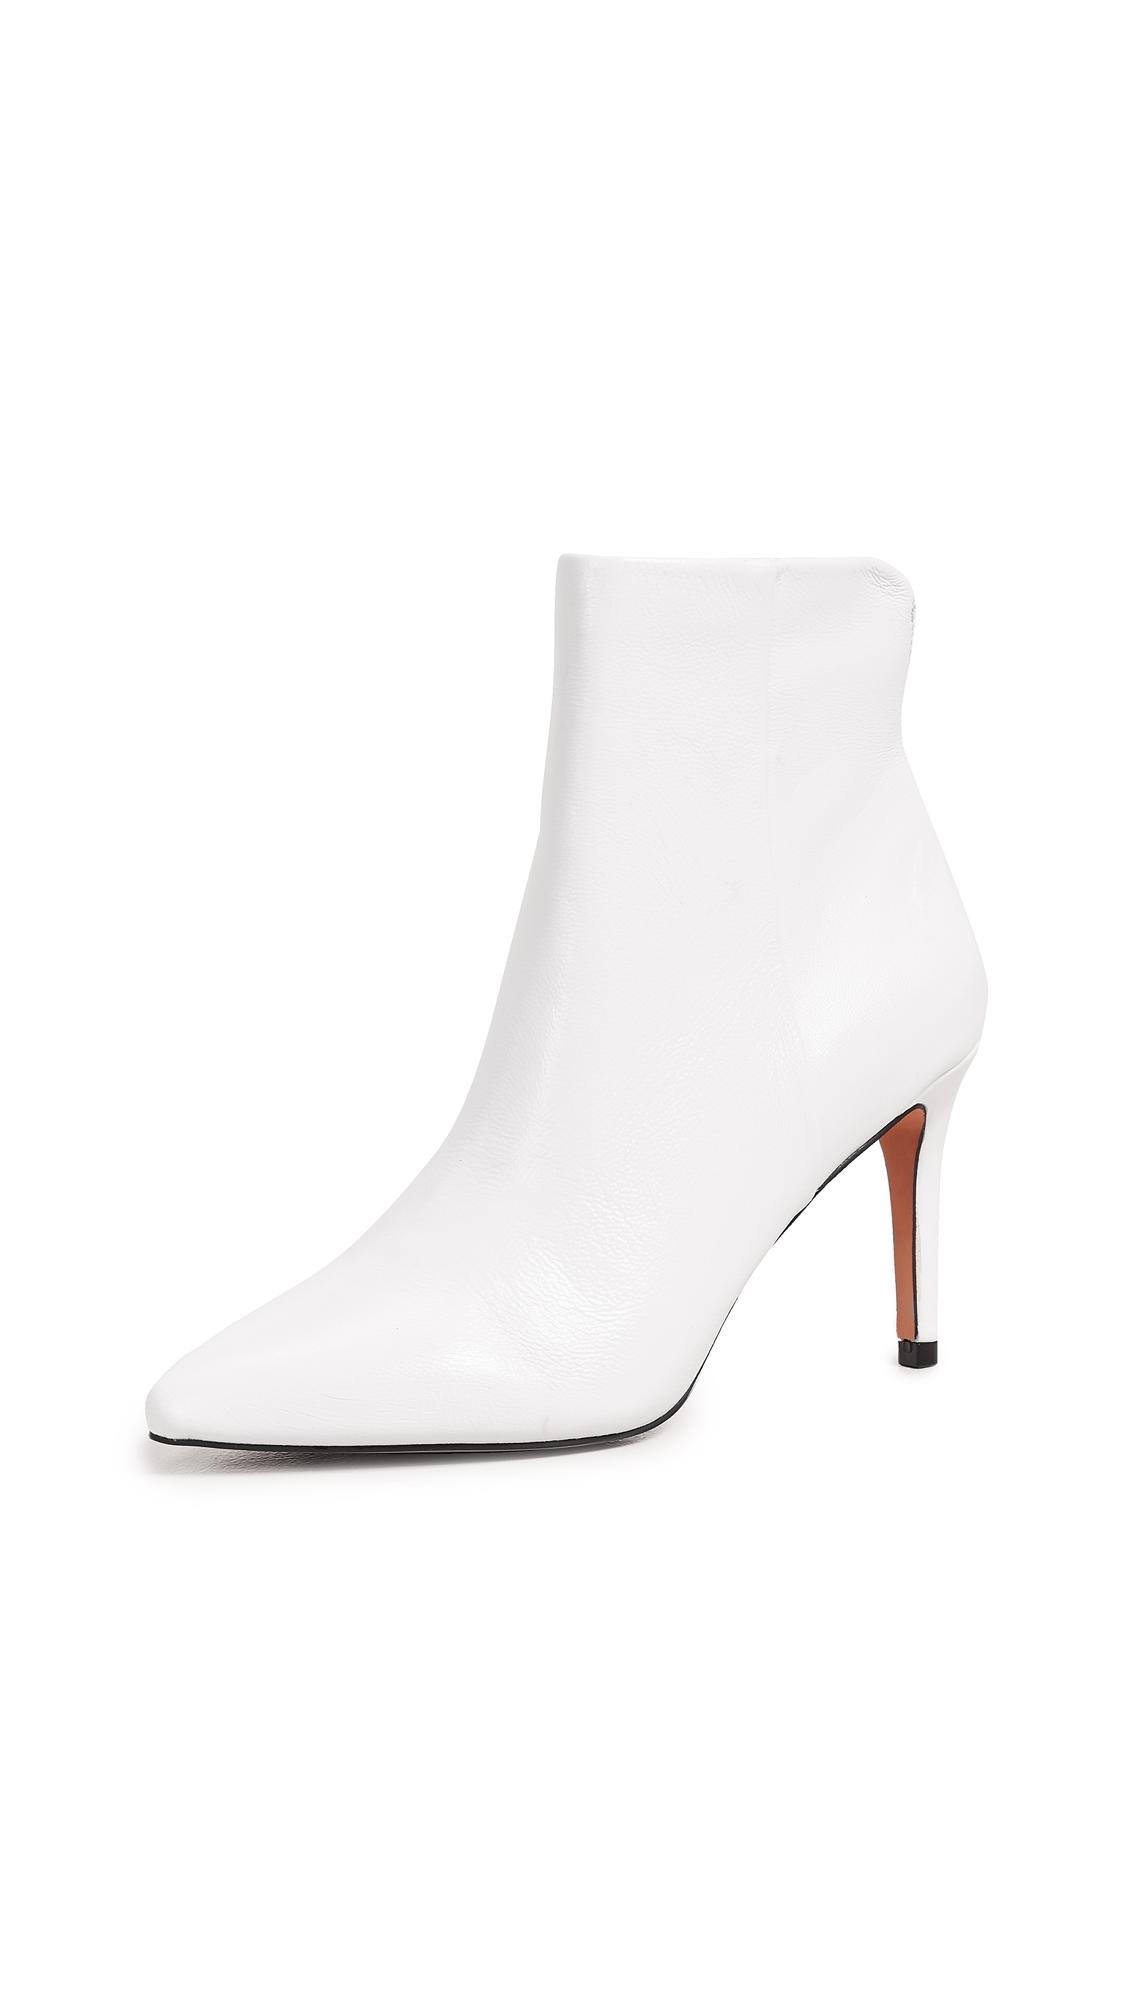 white pointed toe booties